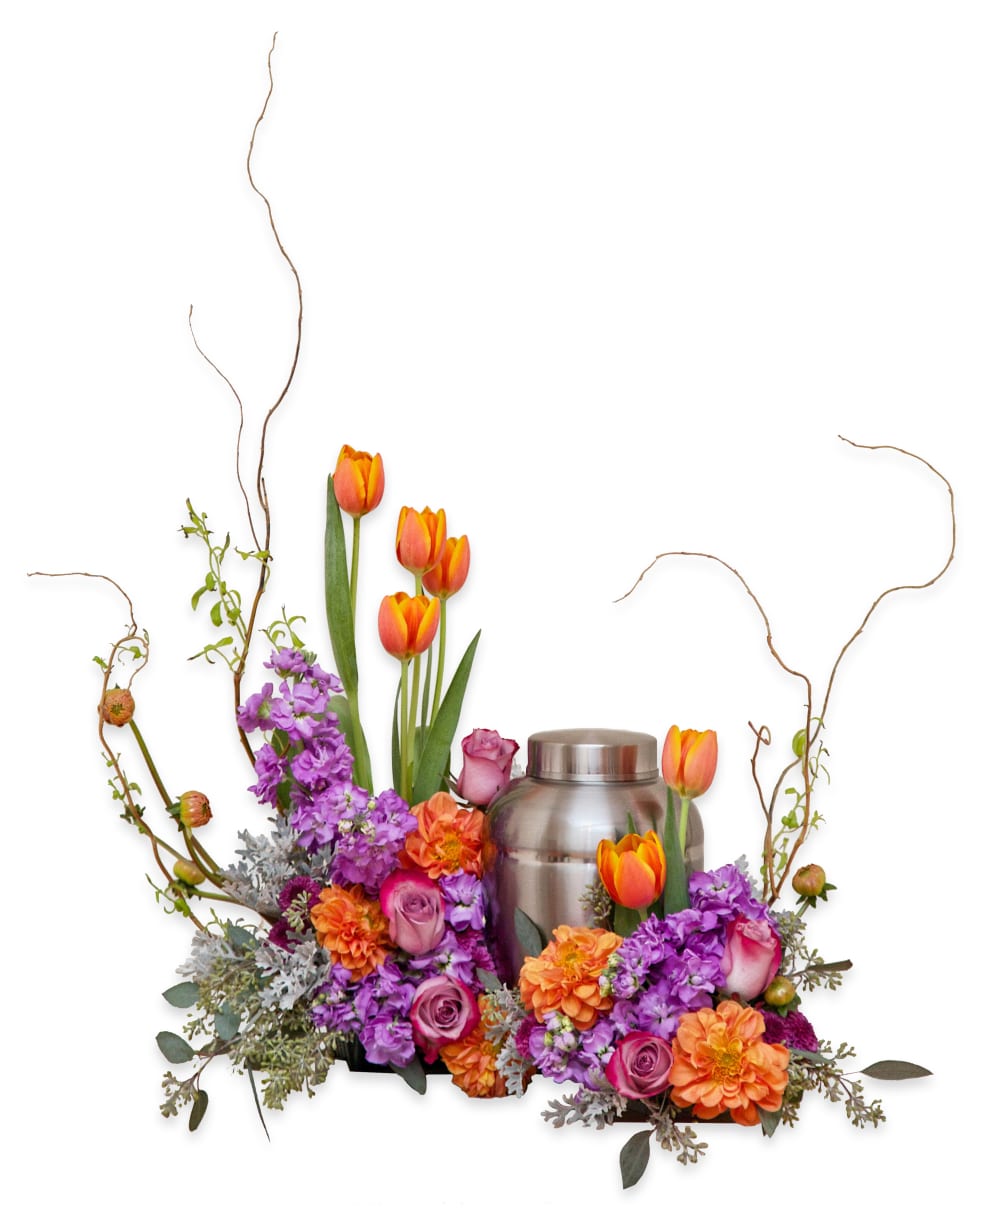 A pure and delicate expression of adoration. This arrangement of orange, lavender